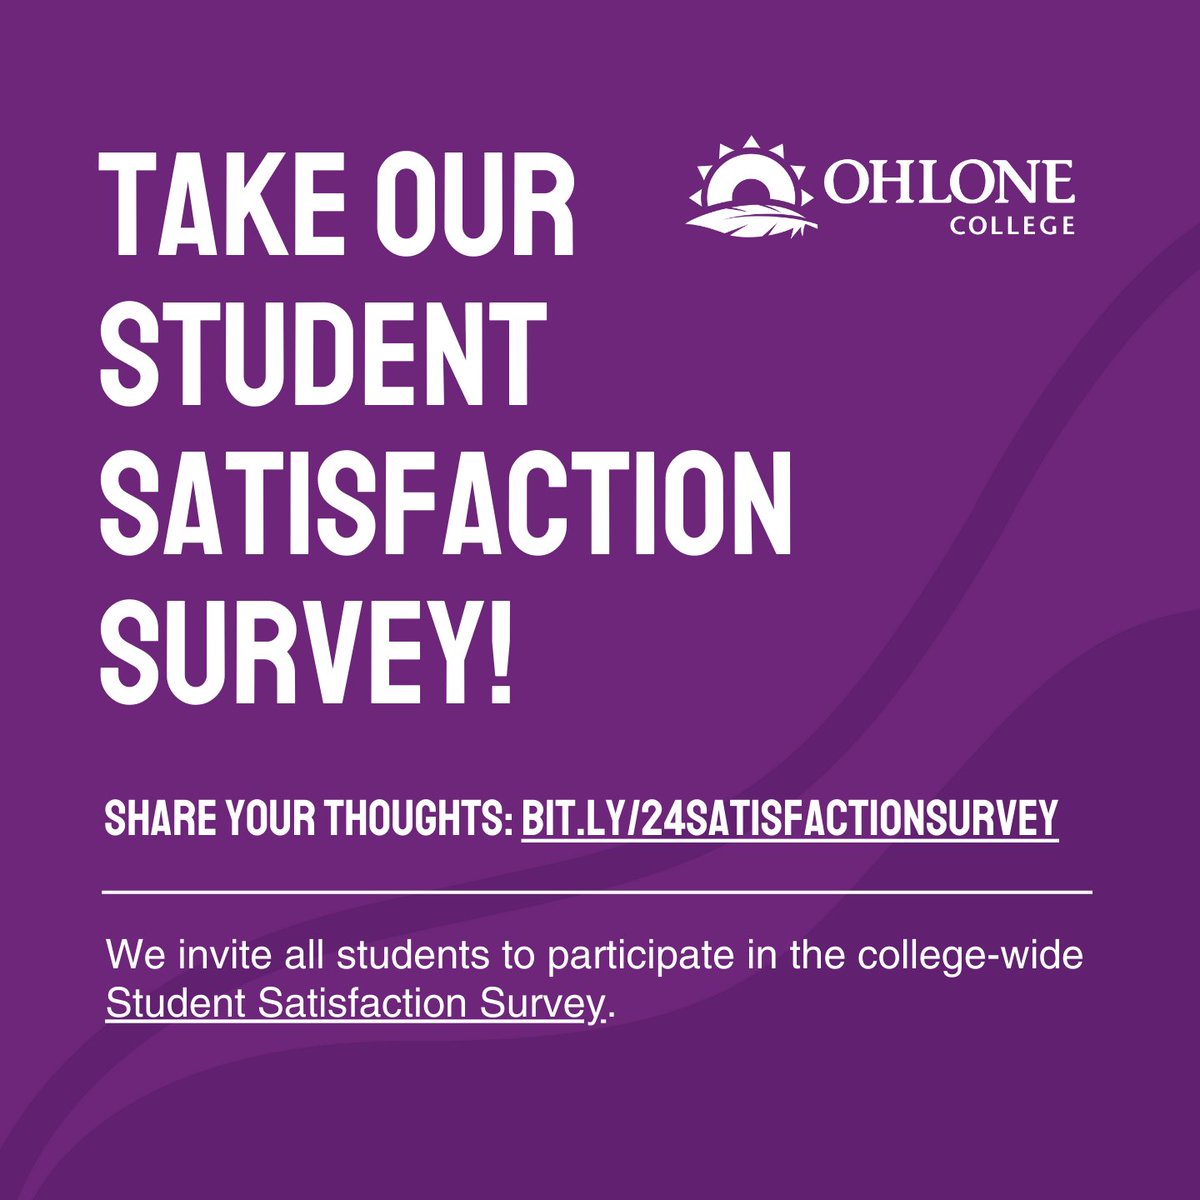 Make Ohlone College a better place by taking the Student Satisfaction Survey! We invite all students to participate in the college-wide Student Satisfaction Survey. Complete the survey by April 28th for your chance to win a prize here: bit.ly/24satisfaction…